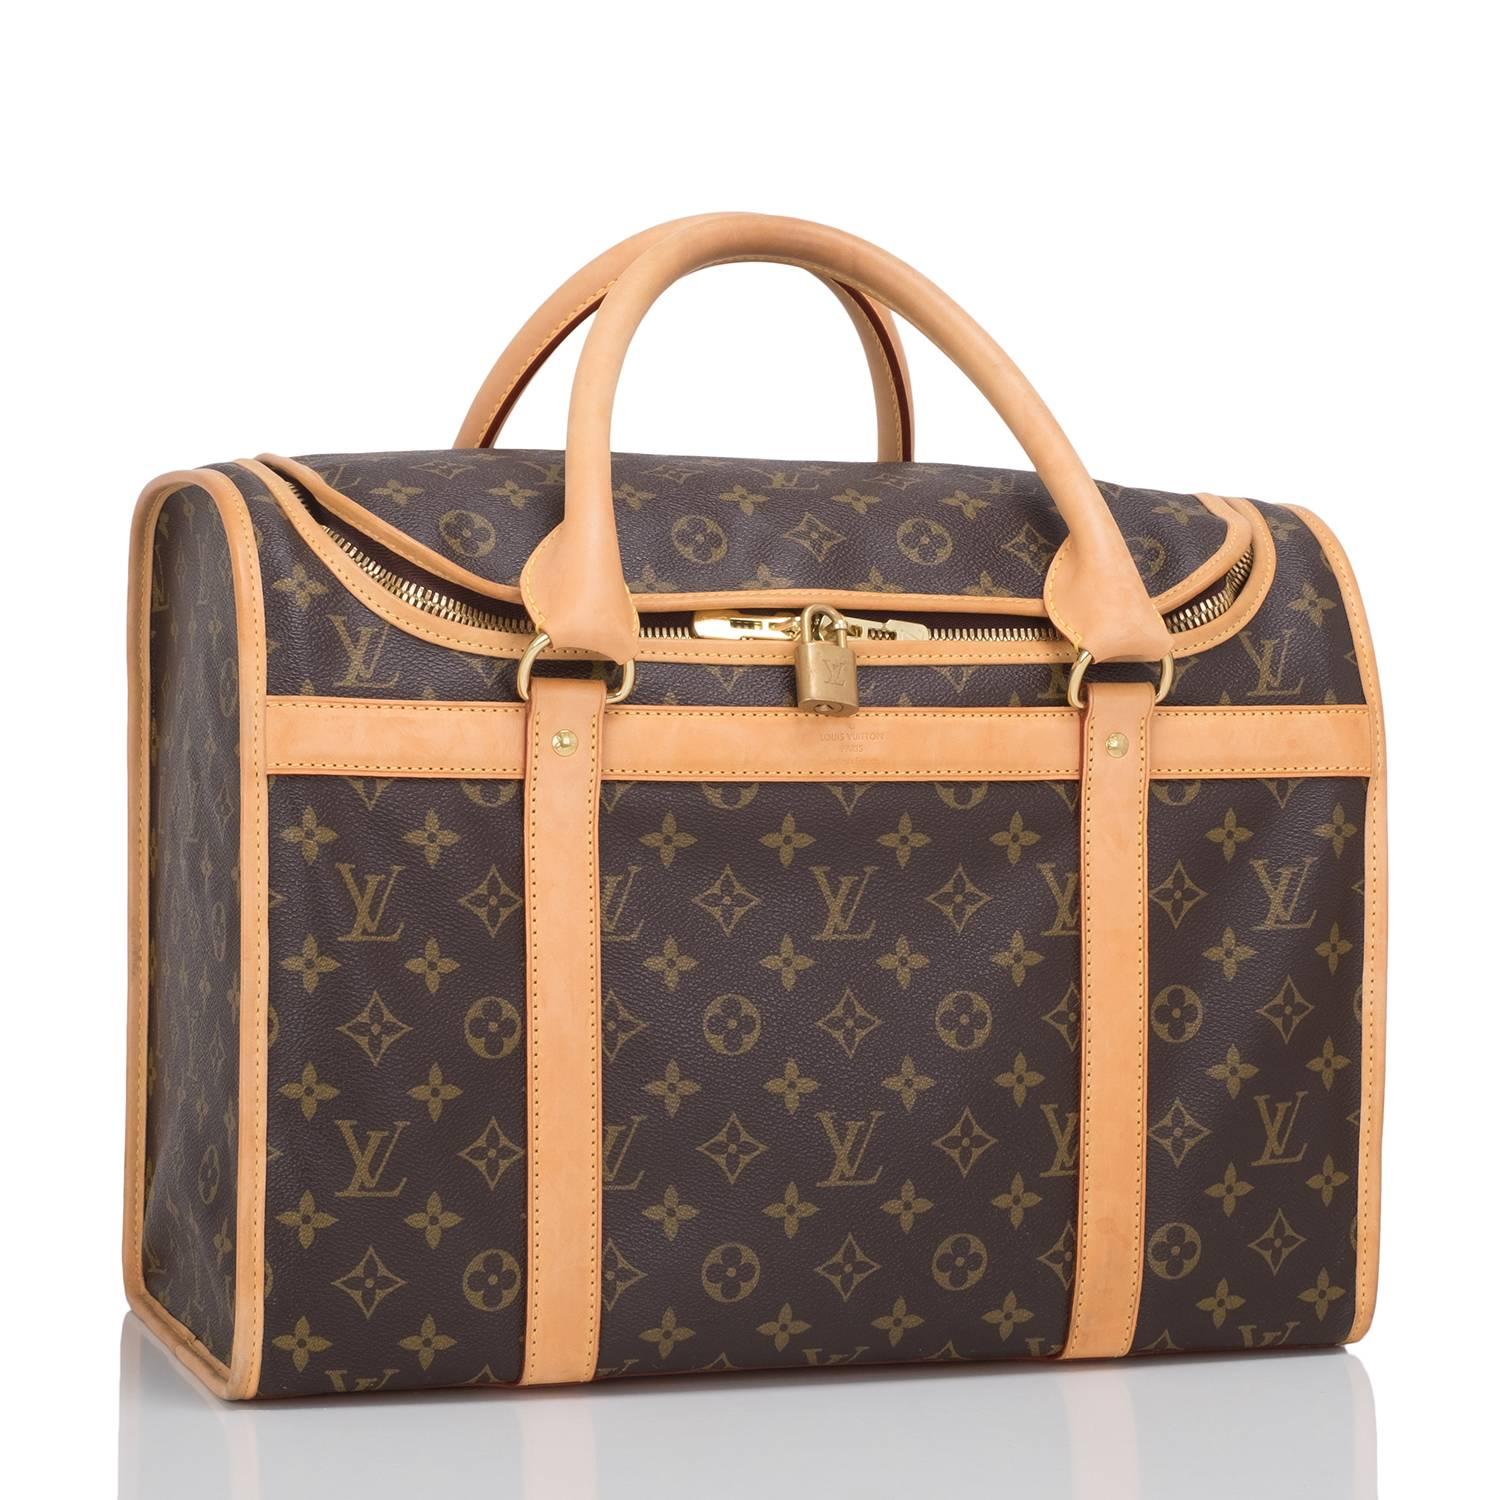 Louis Vuitton Monogram Canvas Dog Carrier 40 of Monogram coated canvas, natural cowhide (vachetta) and golden brass hardware.

This carrier has golden brass Louis Vuitton stamped hardware, natural cowhide (vachetta) trim, breathable side mesh with